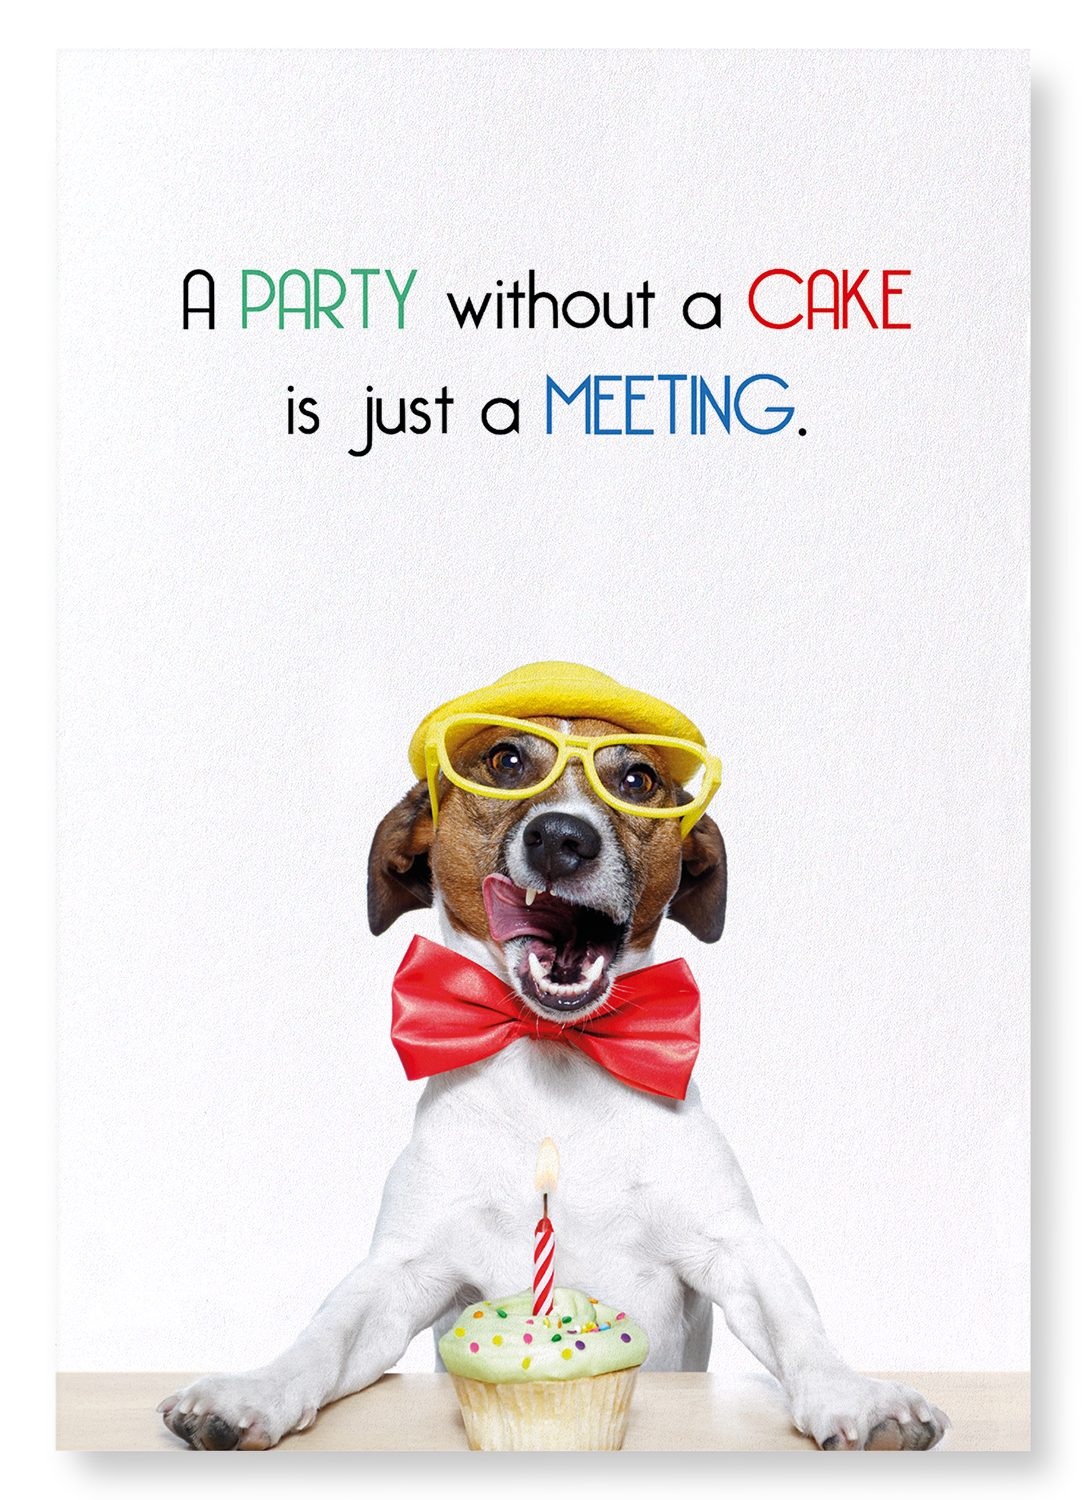 PARTY AND CAKE: Funny Animal Art print